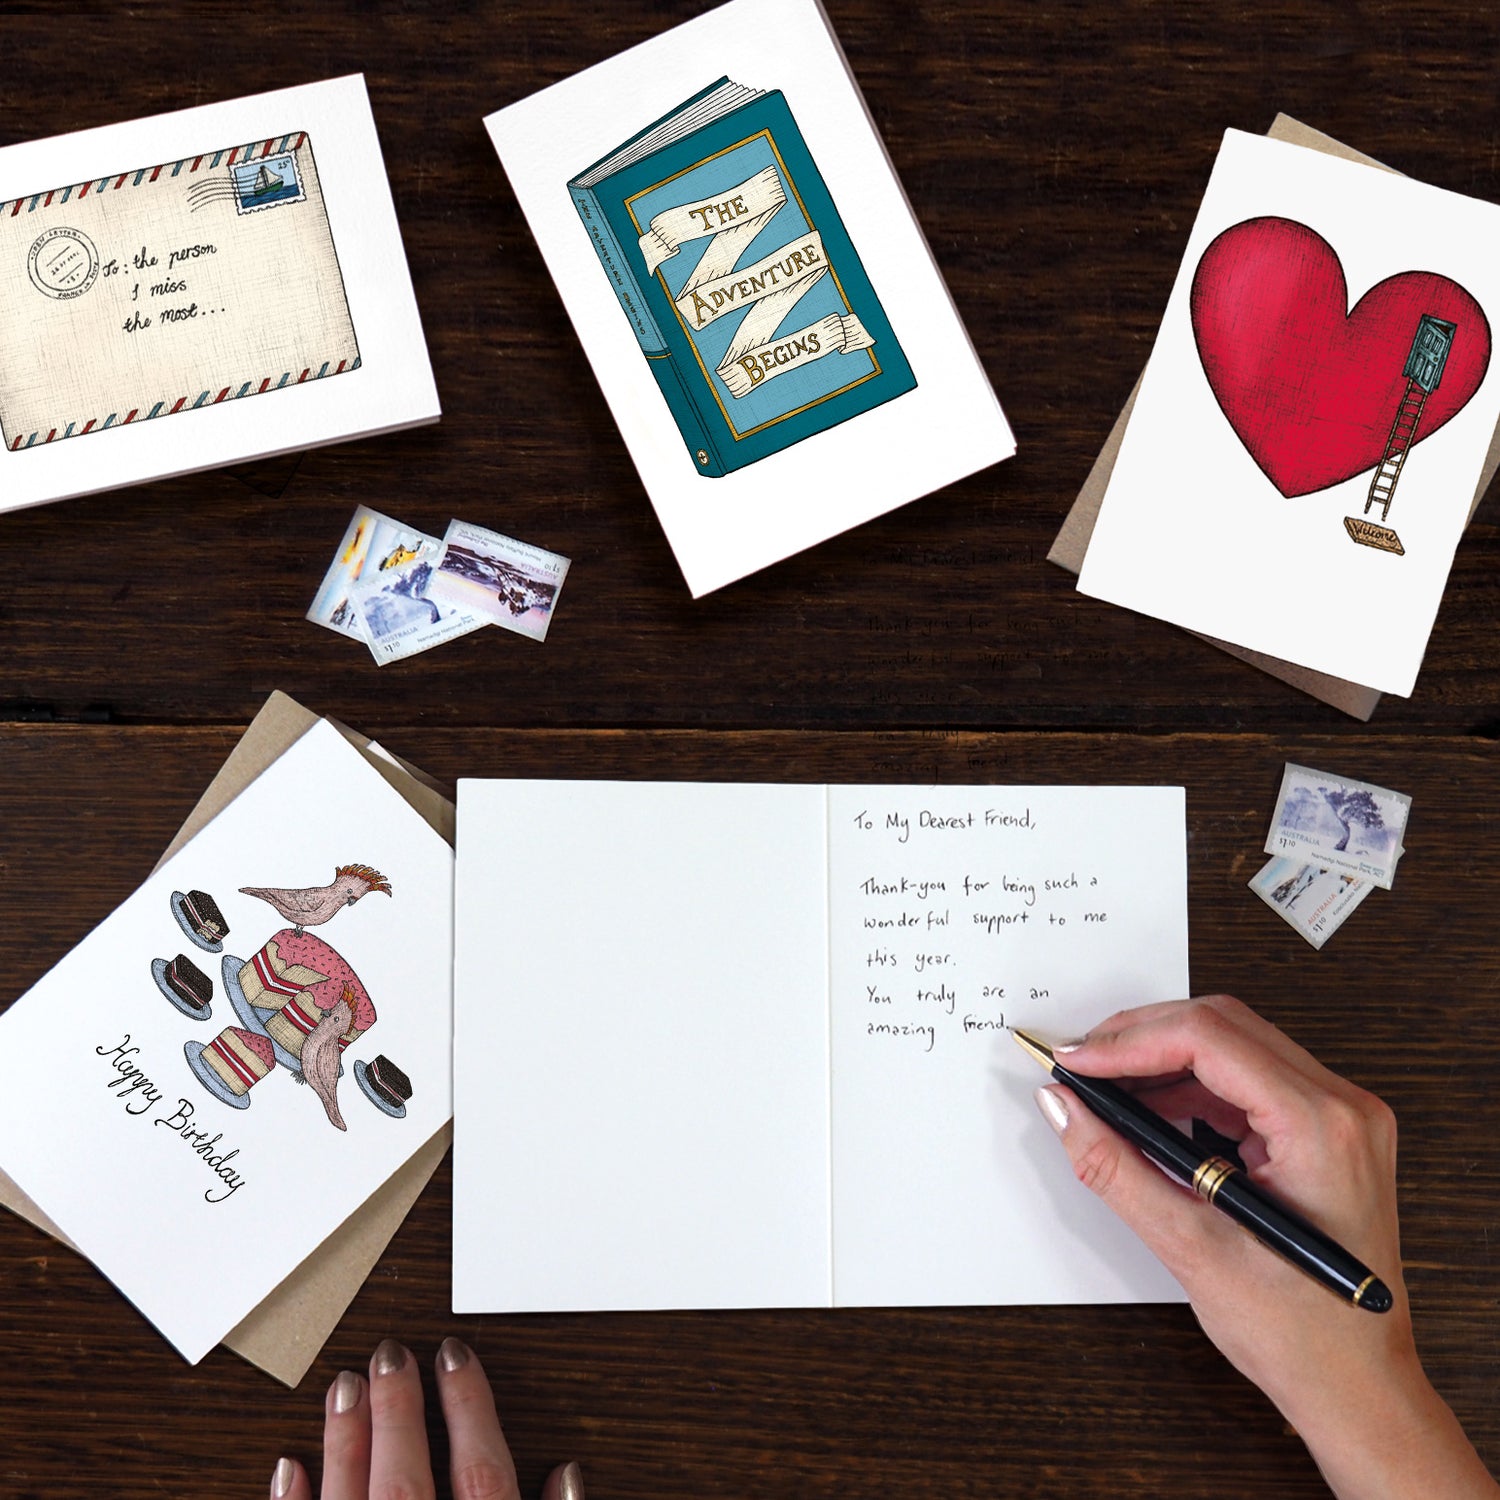 Our top tips: What to write in a greeting card